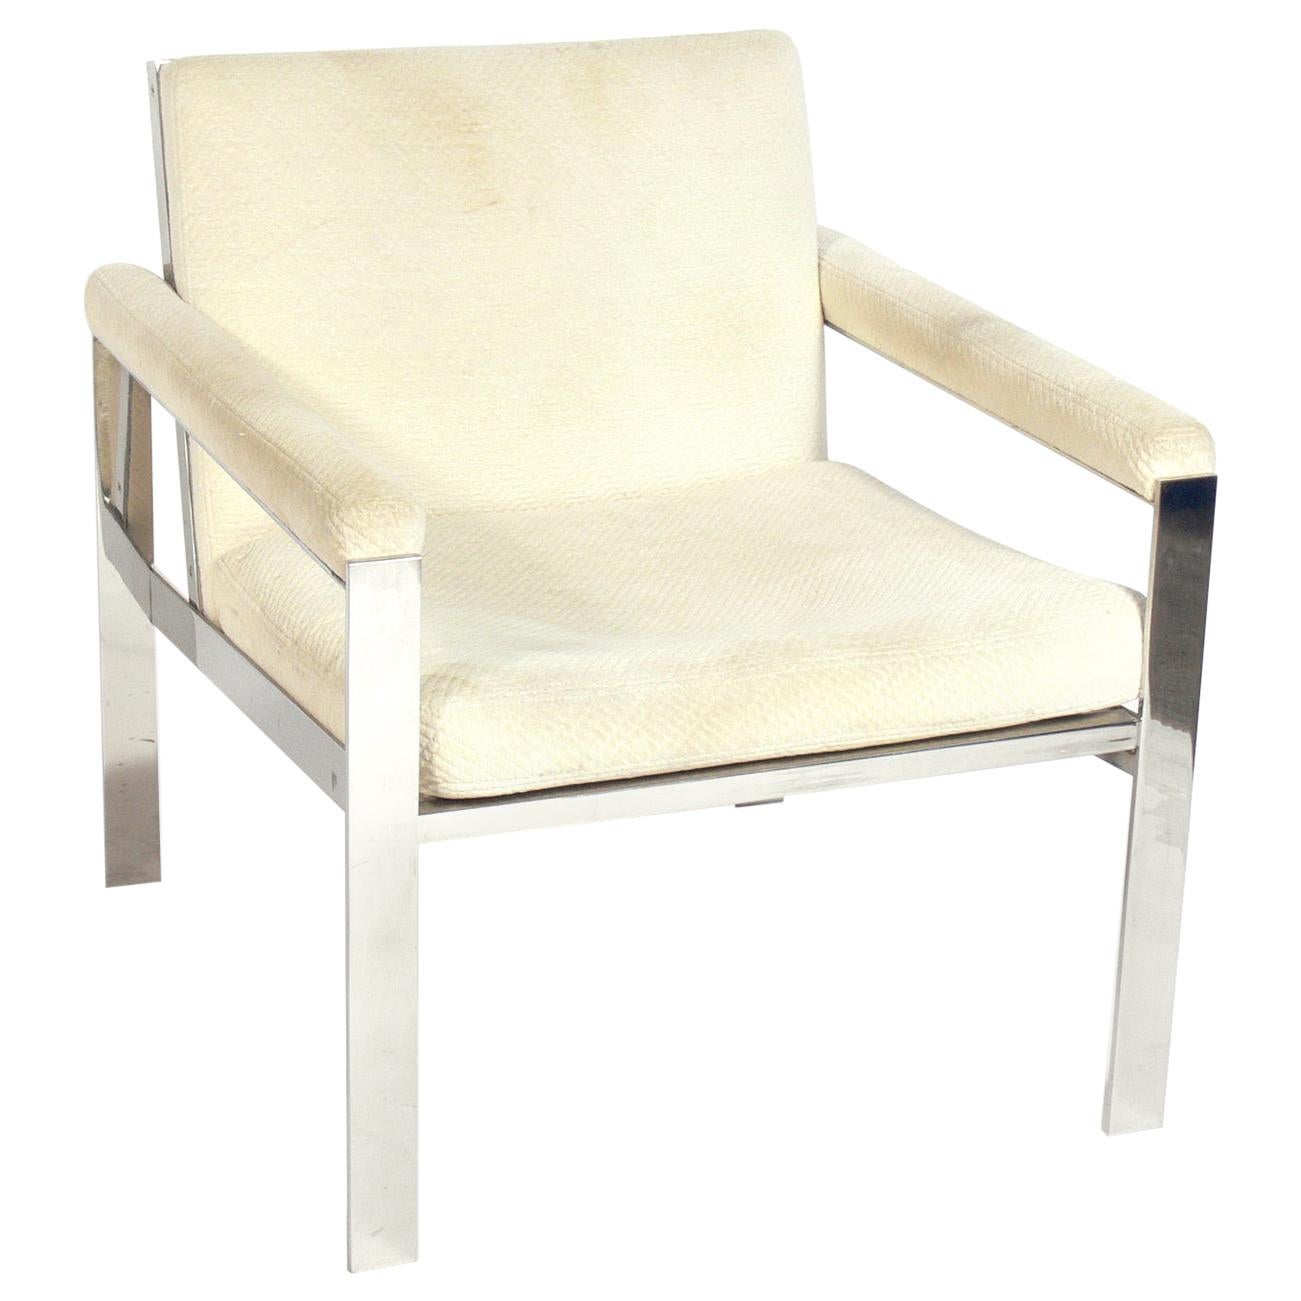 Chaise longue John Vesey Clean Lined